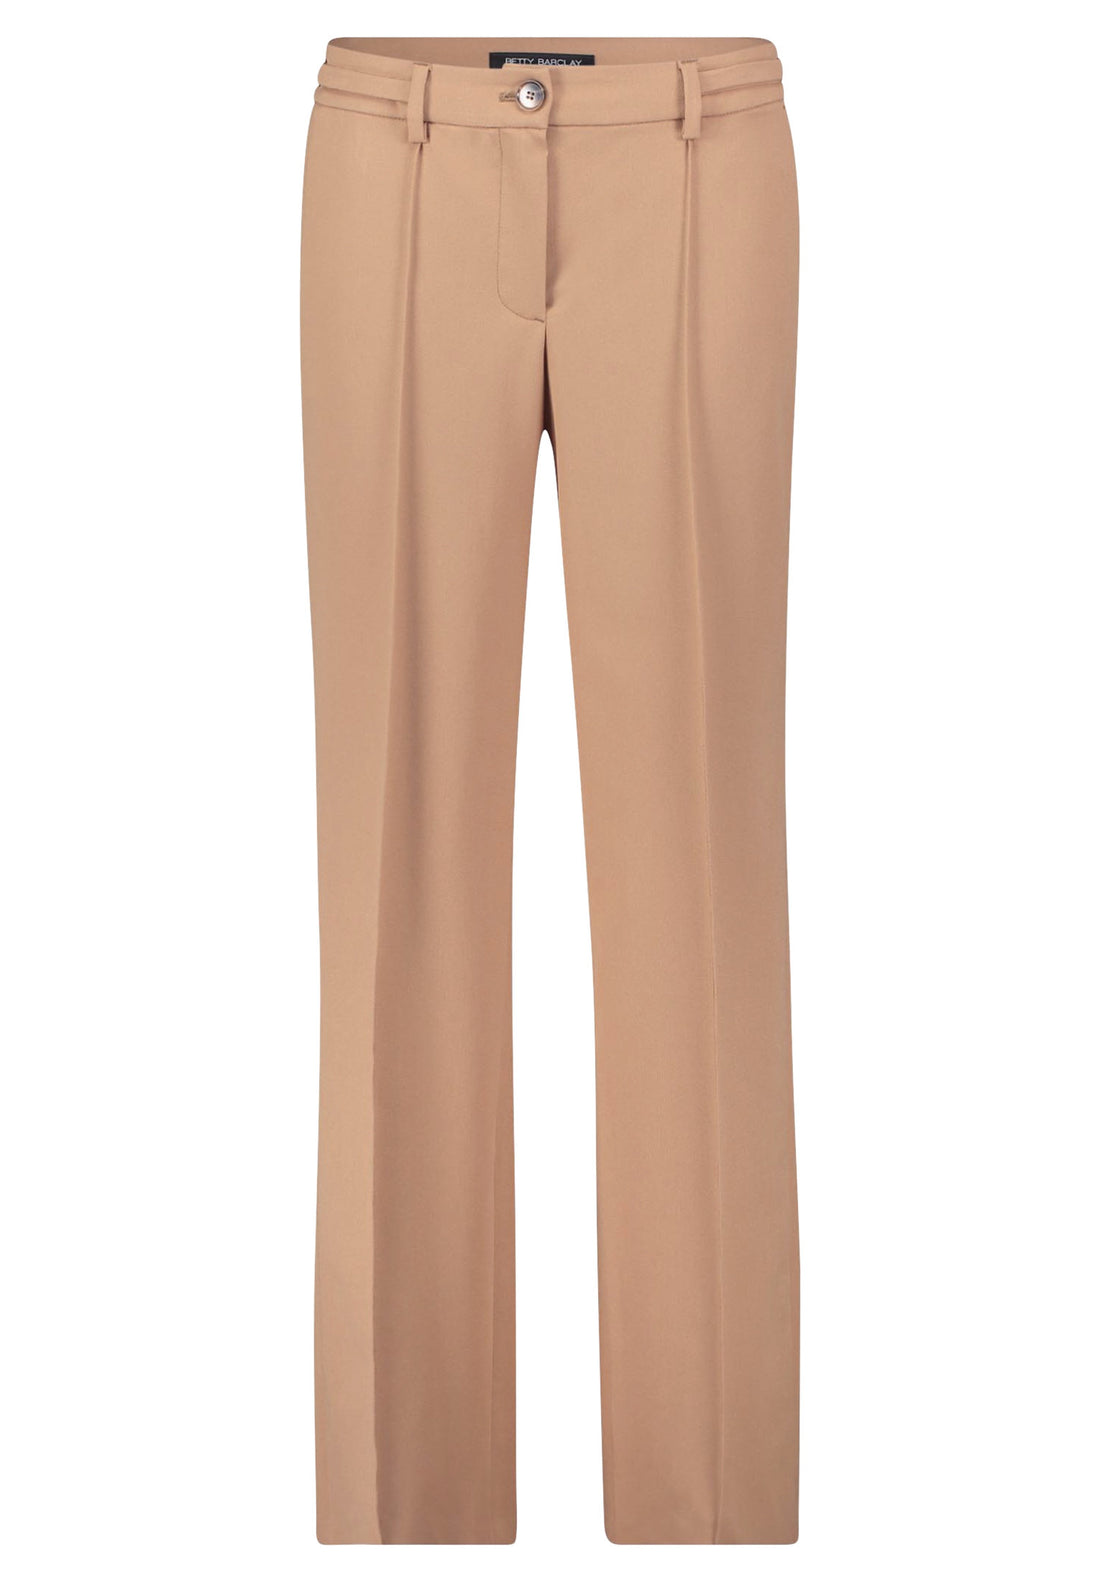 Beige Dress Trousers With Center Pleat_6831-1055_7030_01